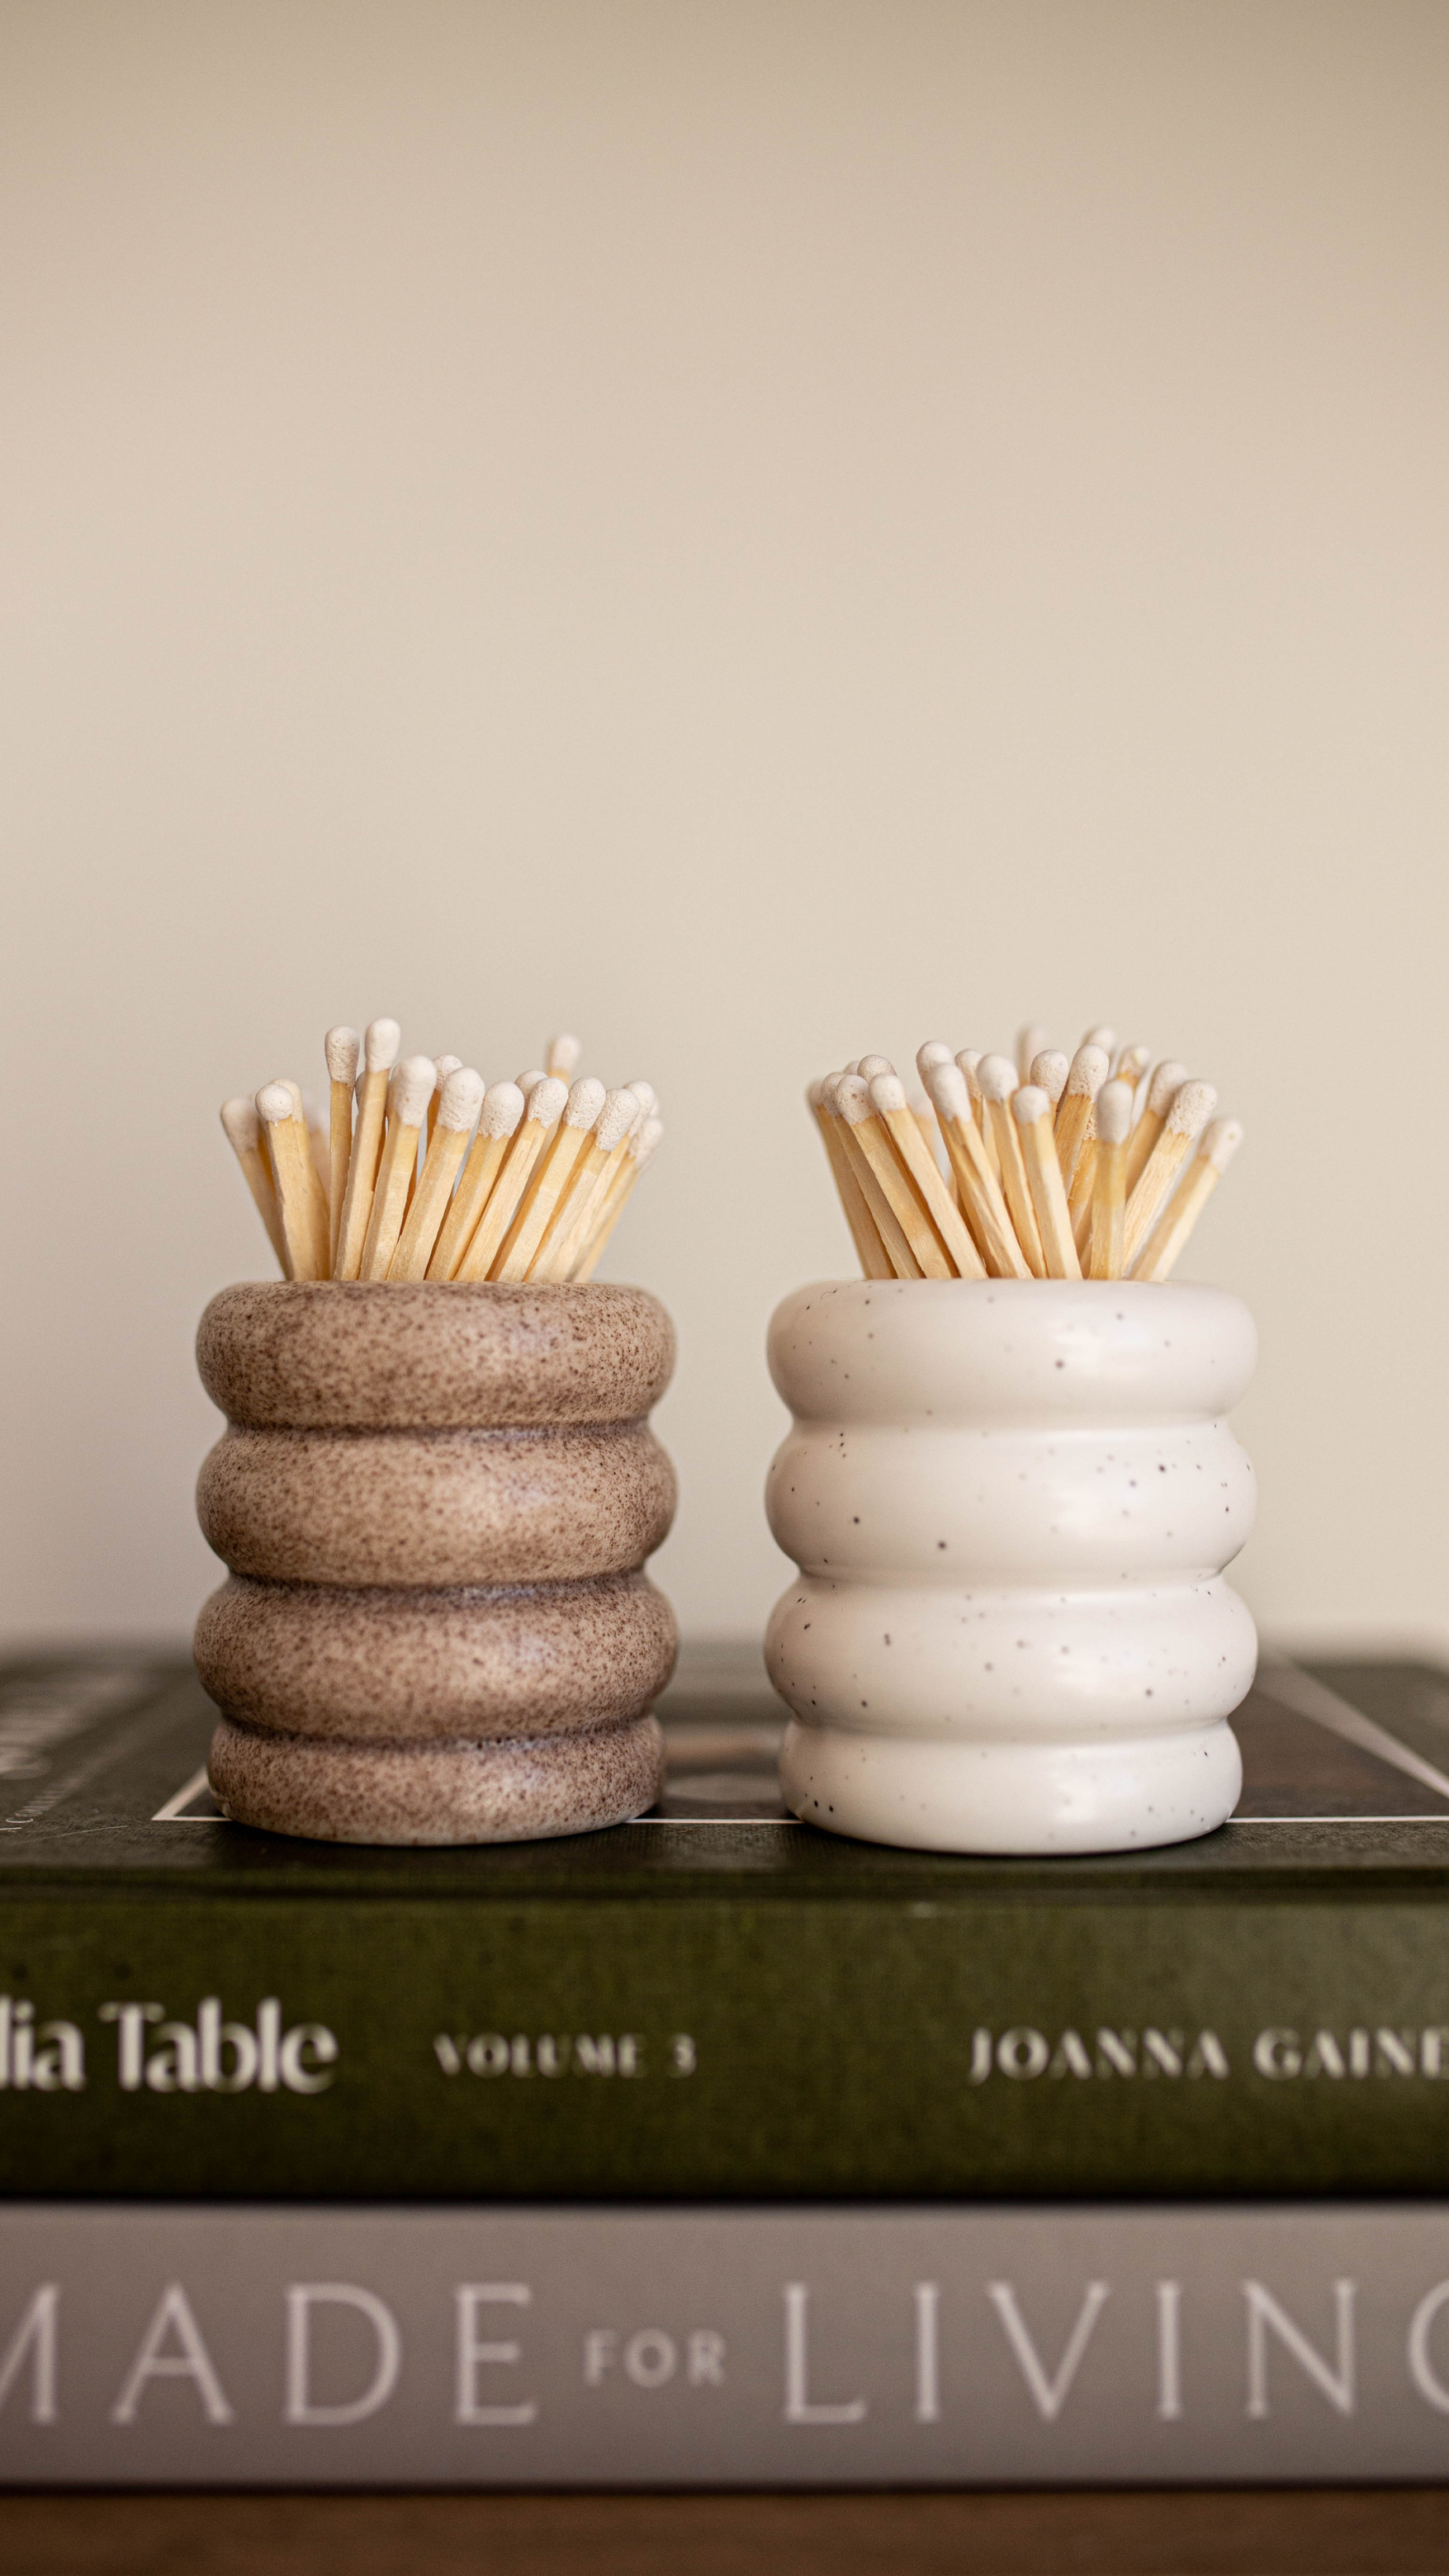 Ceramic Match Pot- Speckled White - Luxe B Co